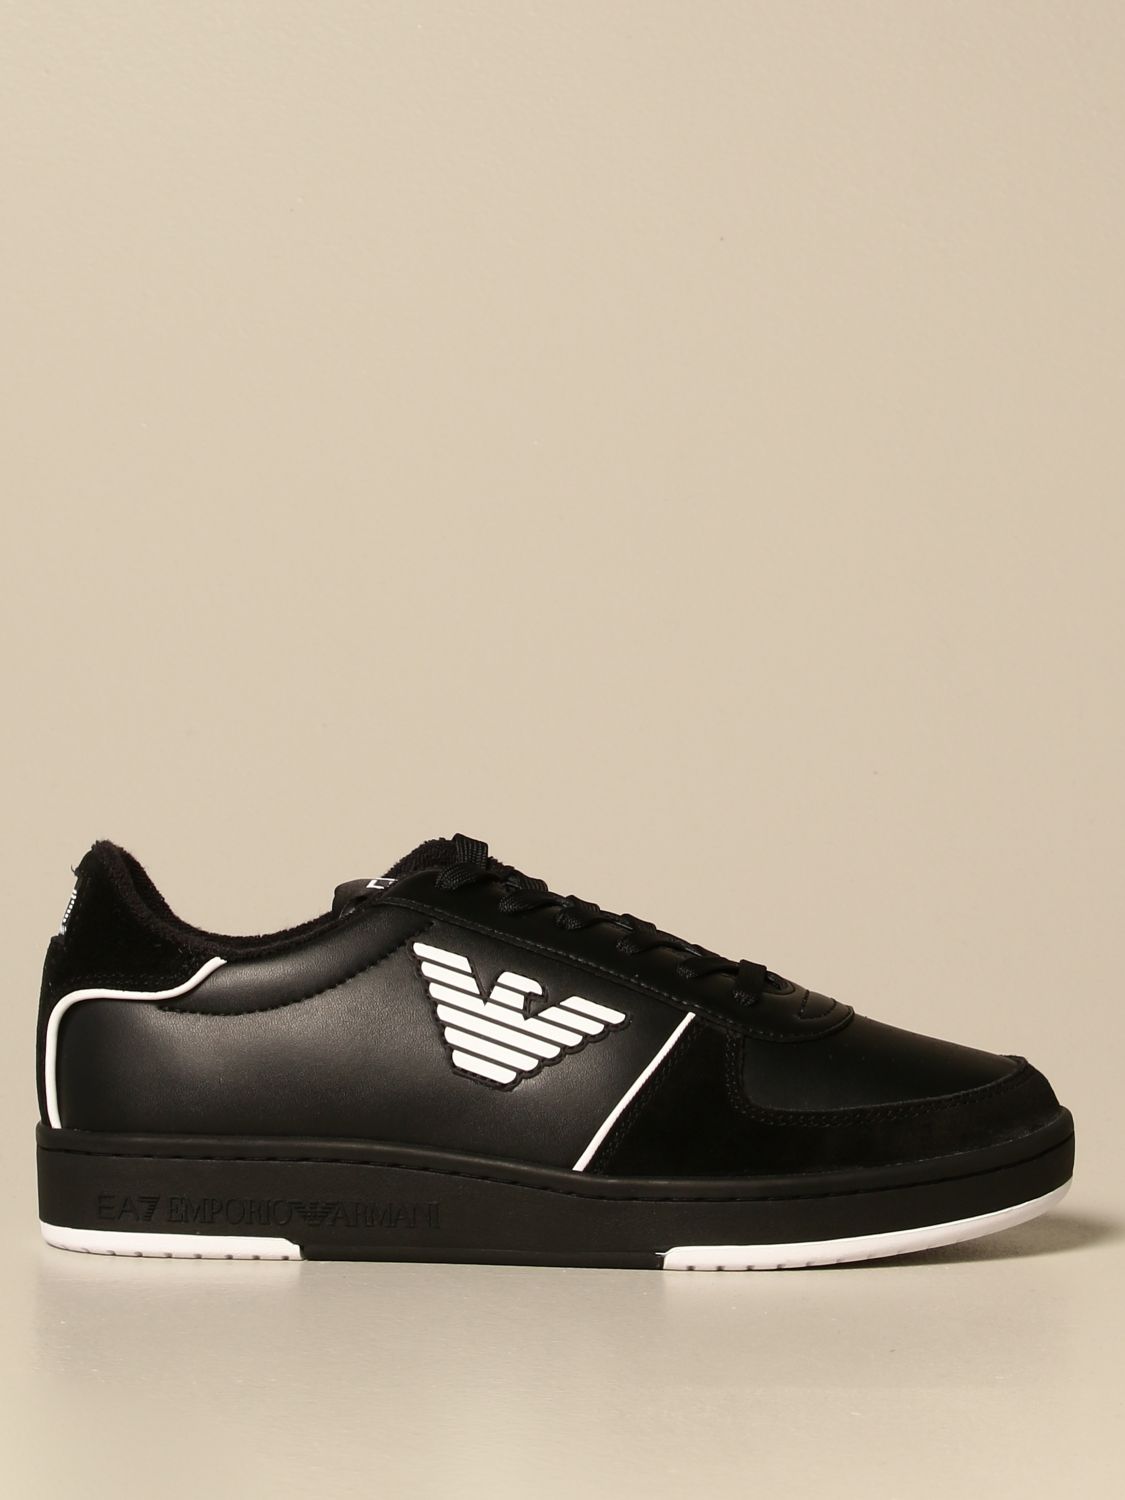 Ea7 Outlet: sneakers in leather and suede - Black | Ea7 sneakers X8X073 ...